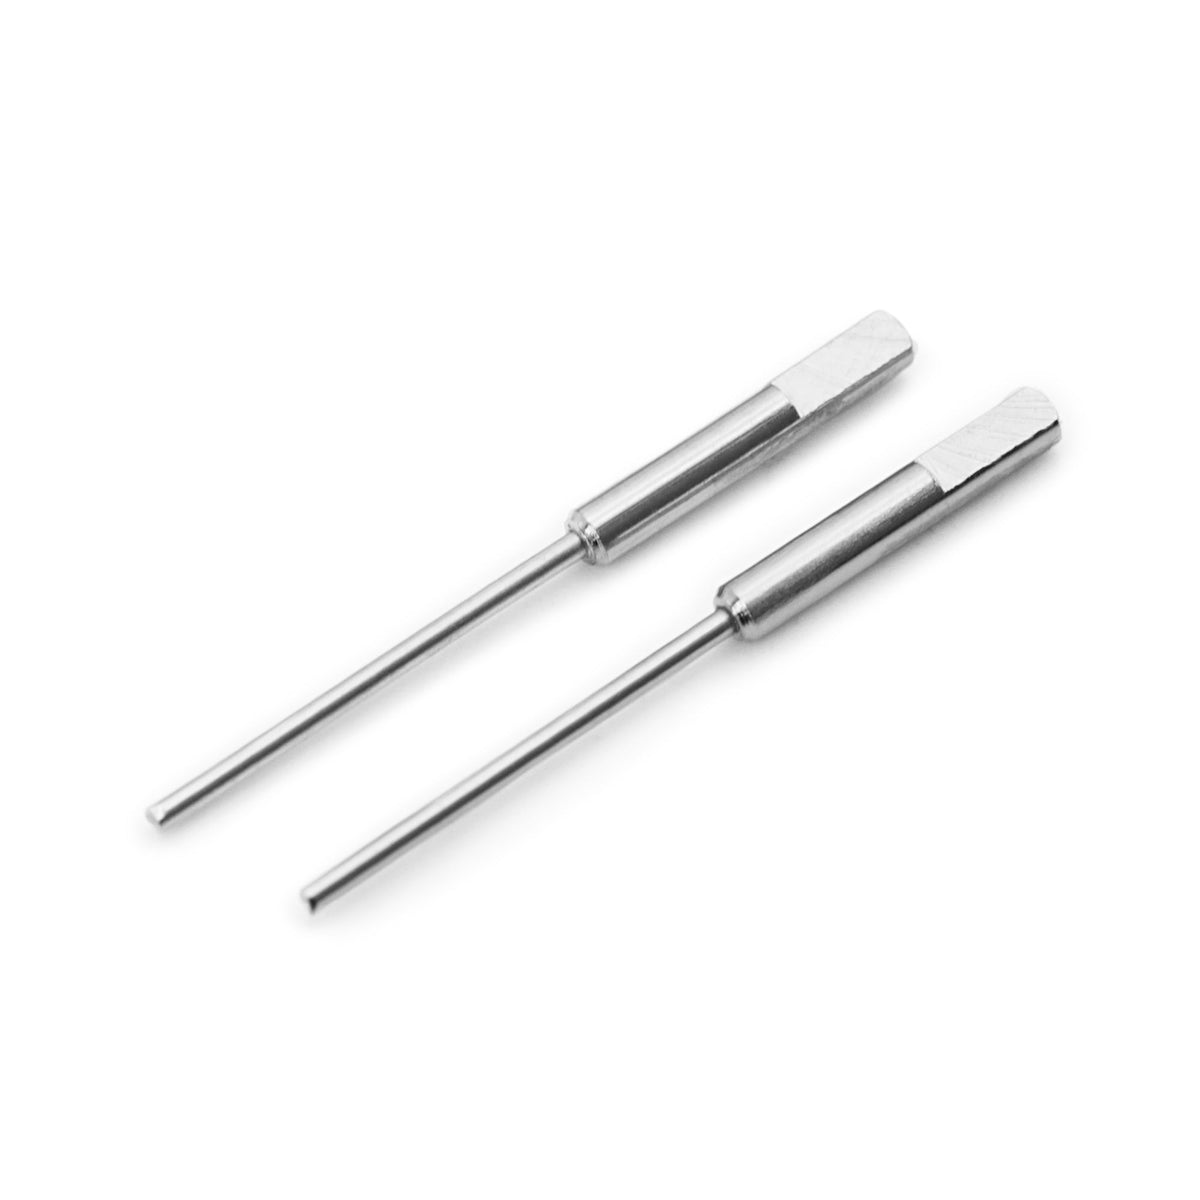 16mm Extra-long Replacement Punch Pins - 2 pcs for Watch Band Double-headed Pin Punch Pin Extractor Strapcode Watch Bands